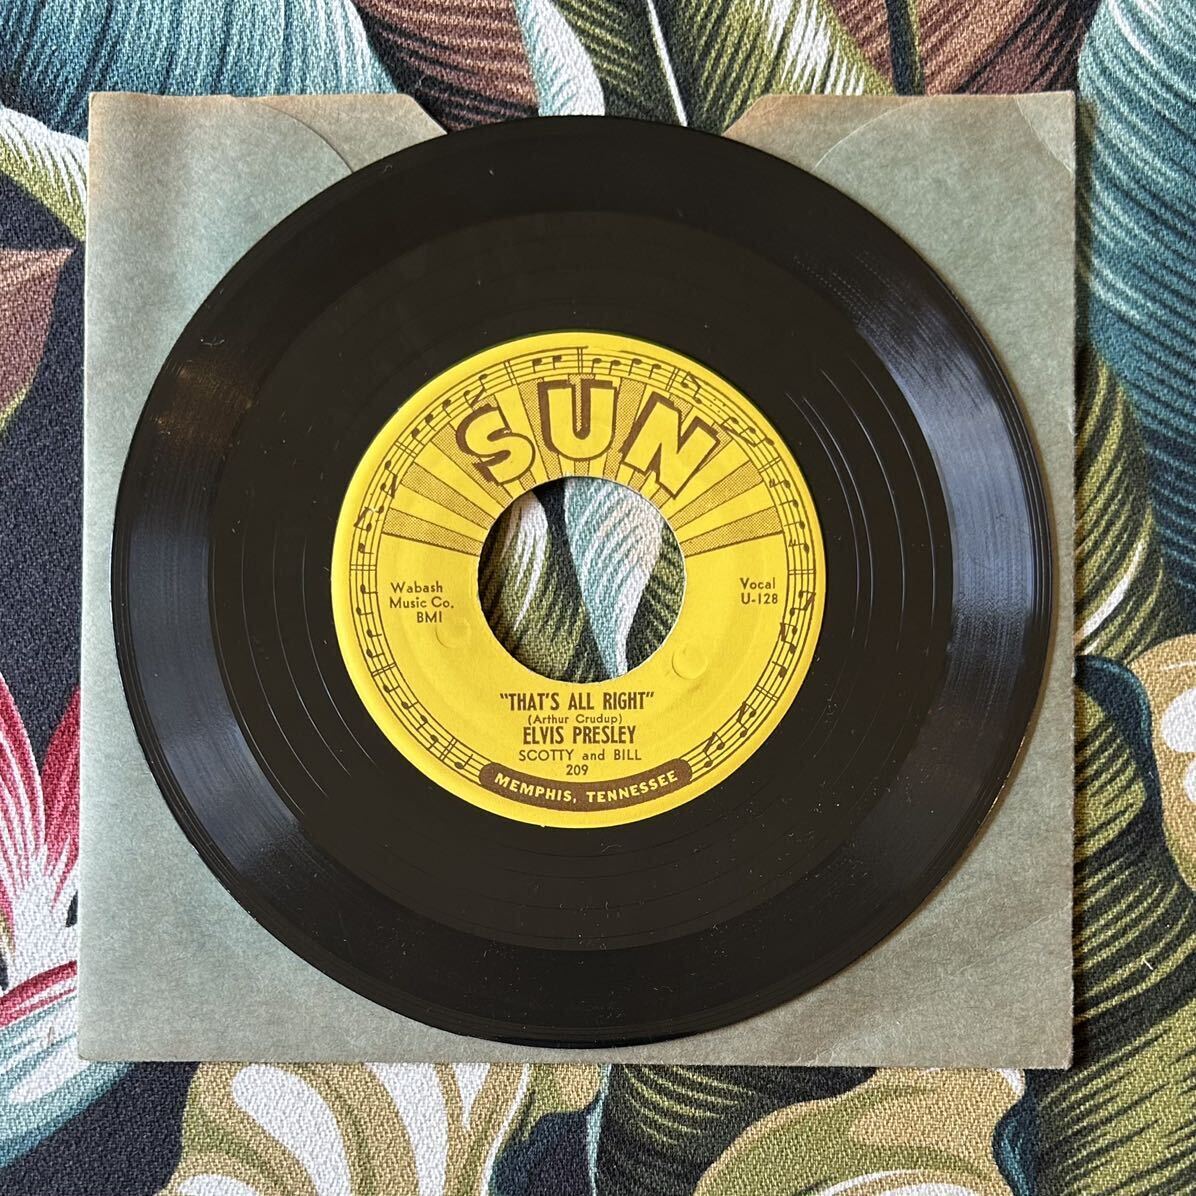 Elvis Presley Scotty And Bill 7inch That's All Right .. 1954 US Original Pressing Sun Records - 209 ロカビリー_画像1